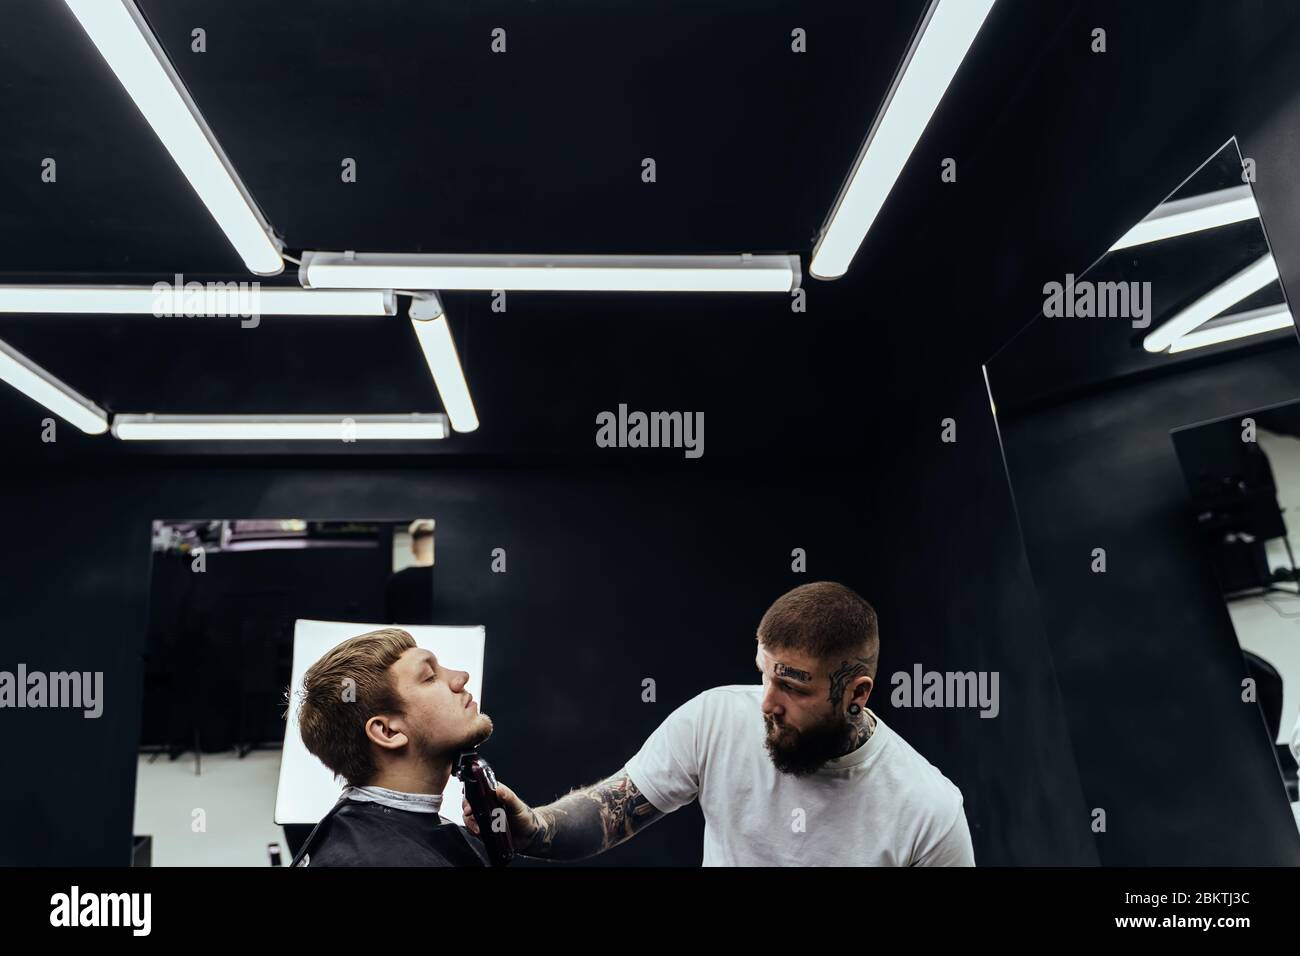 Tattooed Barber trimming bearded man with shaving machine in barbershop. Hairstyling process. Hairstylist cutting the beard of a bearded male. Stock Photo